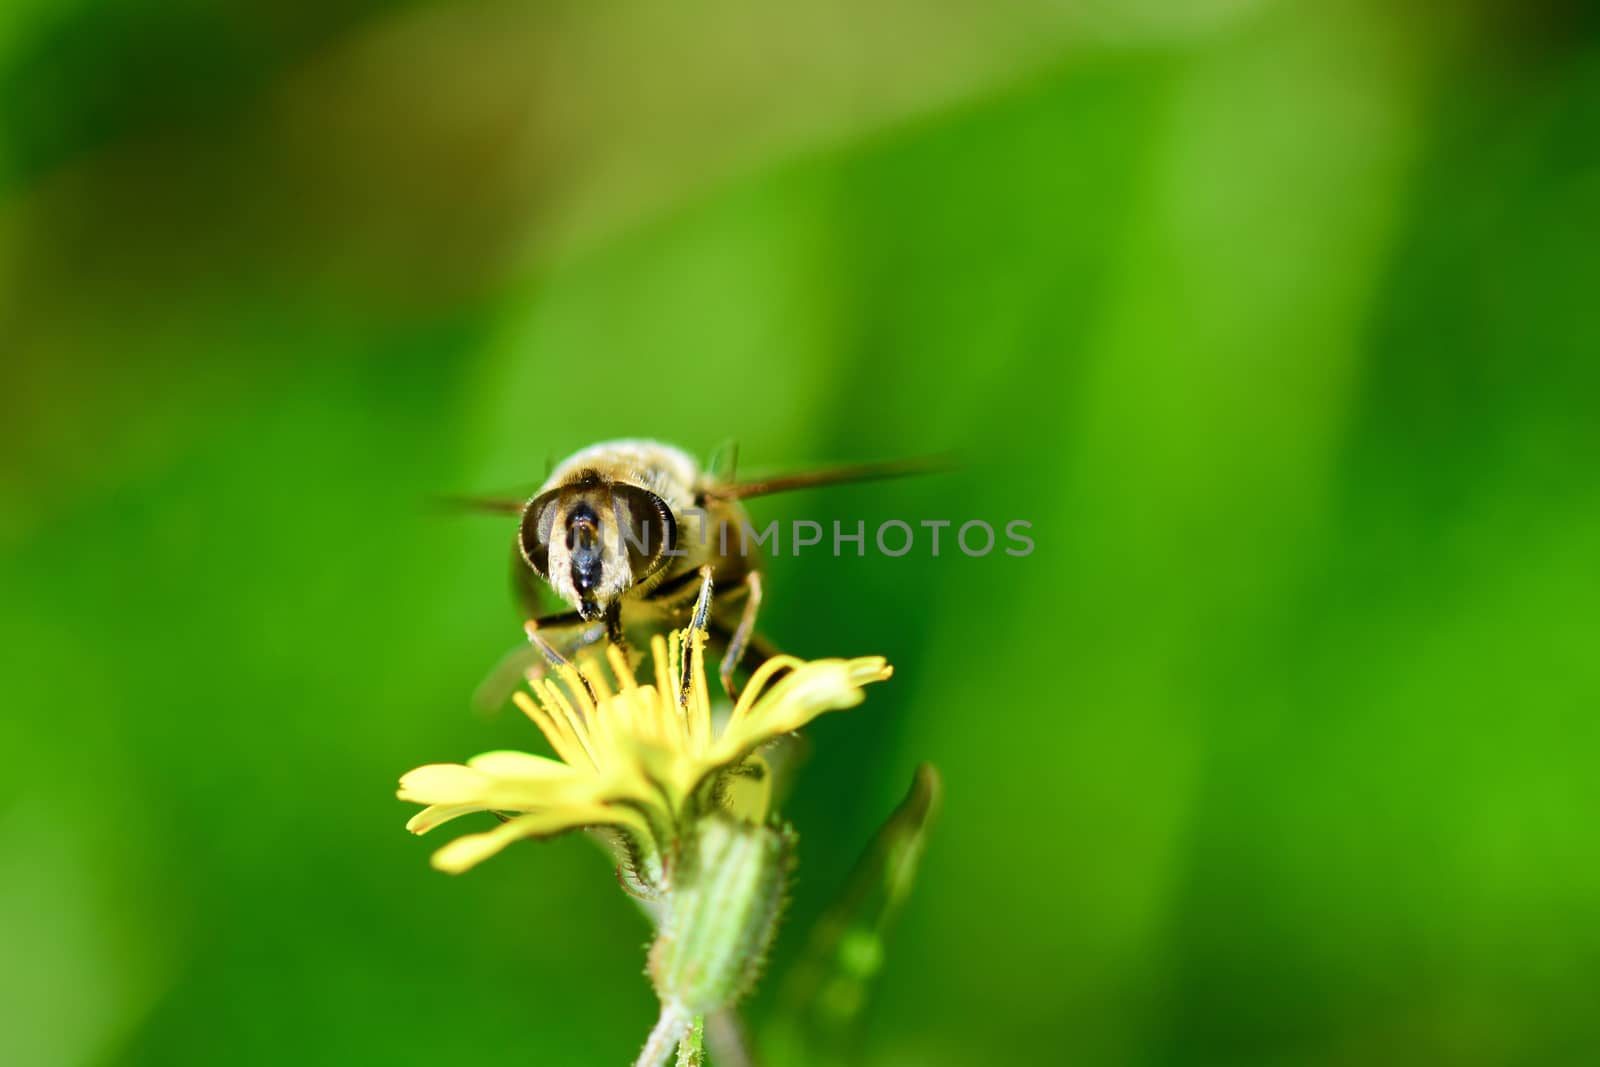 Macro of a Hoverfly. Hoverflies, also called flower flies or syrphid flies, make up the insect family Syrphidae. by Marshalkina